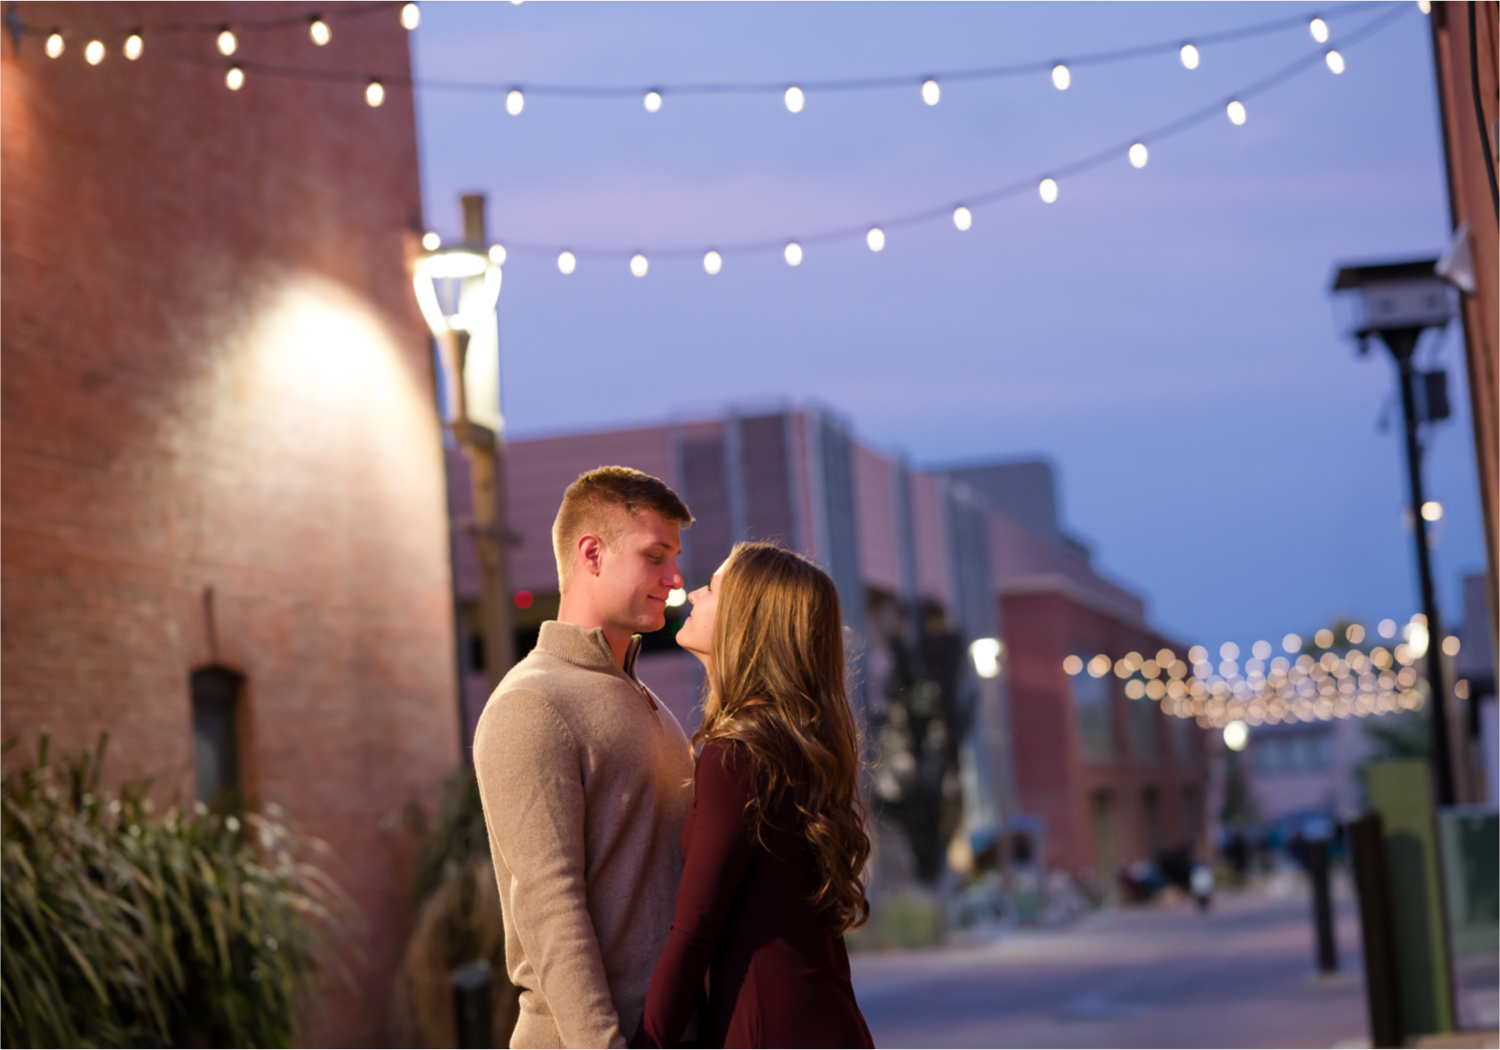 Fall Engagement in Old Town Fort Collins | Britni Girard Photography | Colorado Wedding Photography and Videography | Husband and Wife Team | Wandering the alley's and old town square with twinkle lights all around